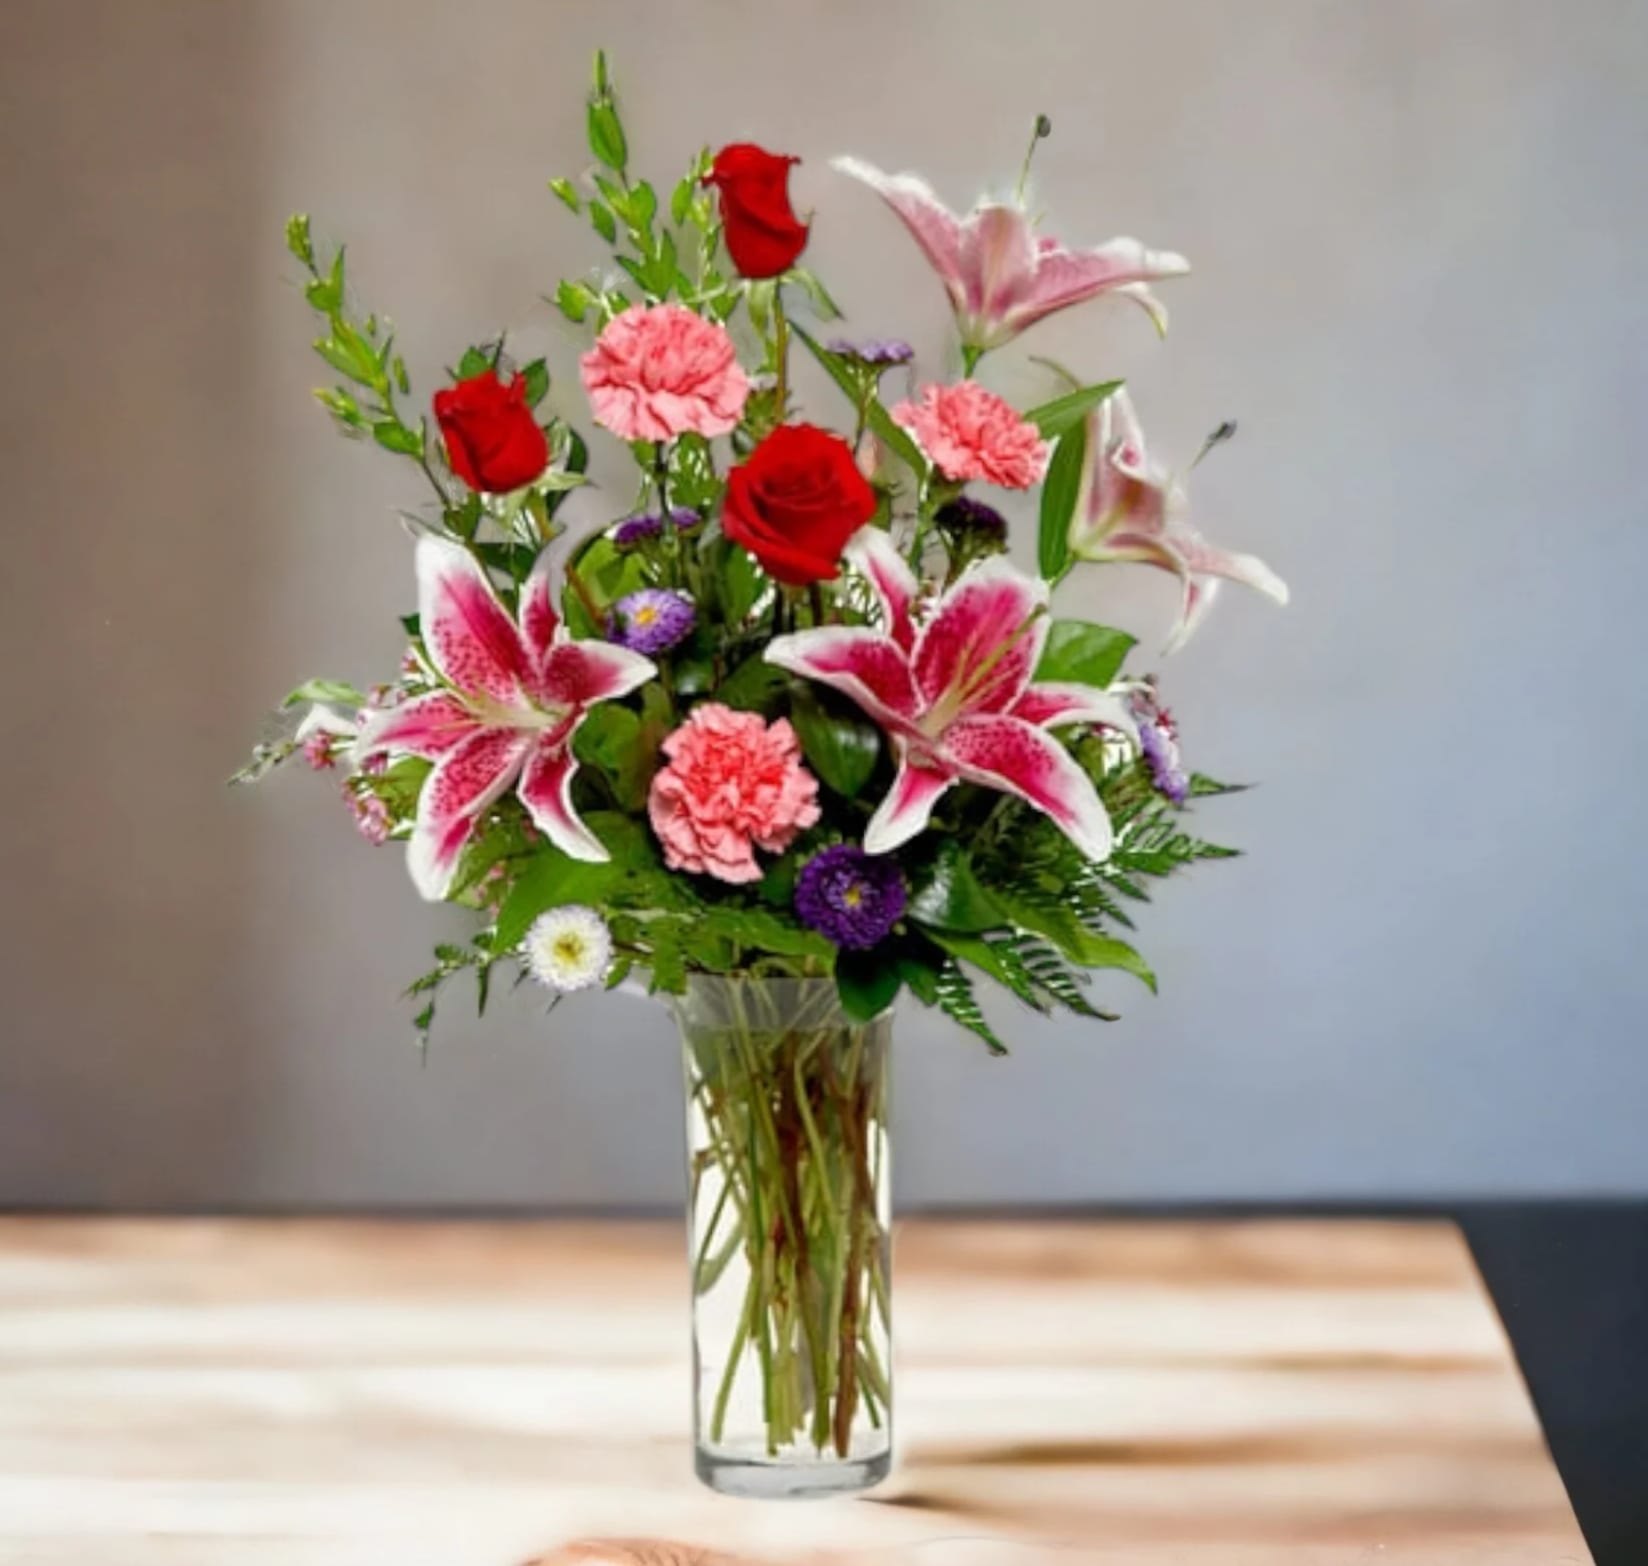 From the Garden - Does someone you know need a pick-me-up? Lift their spirits – and make the day special – by sending this charming display of blushing blossoms in shades of pink, red and purple. It’s the perfect all-occasion, fresh-from-the-garden bouquet.